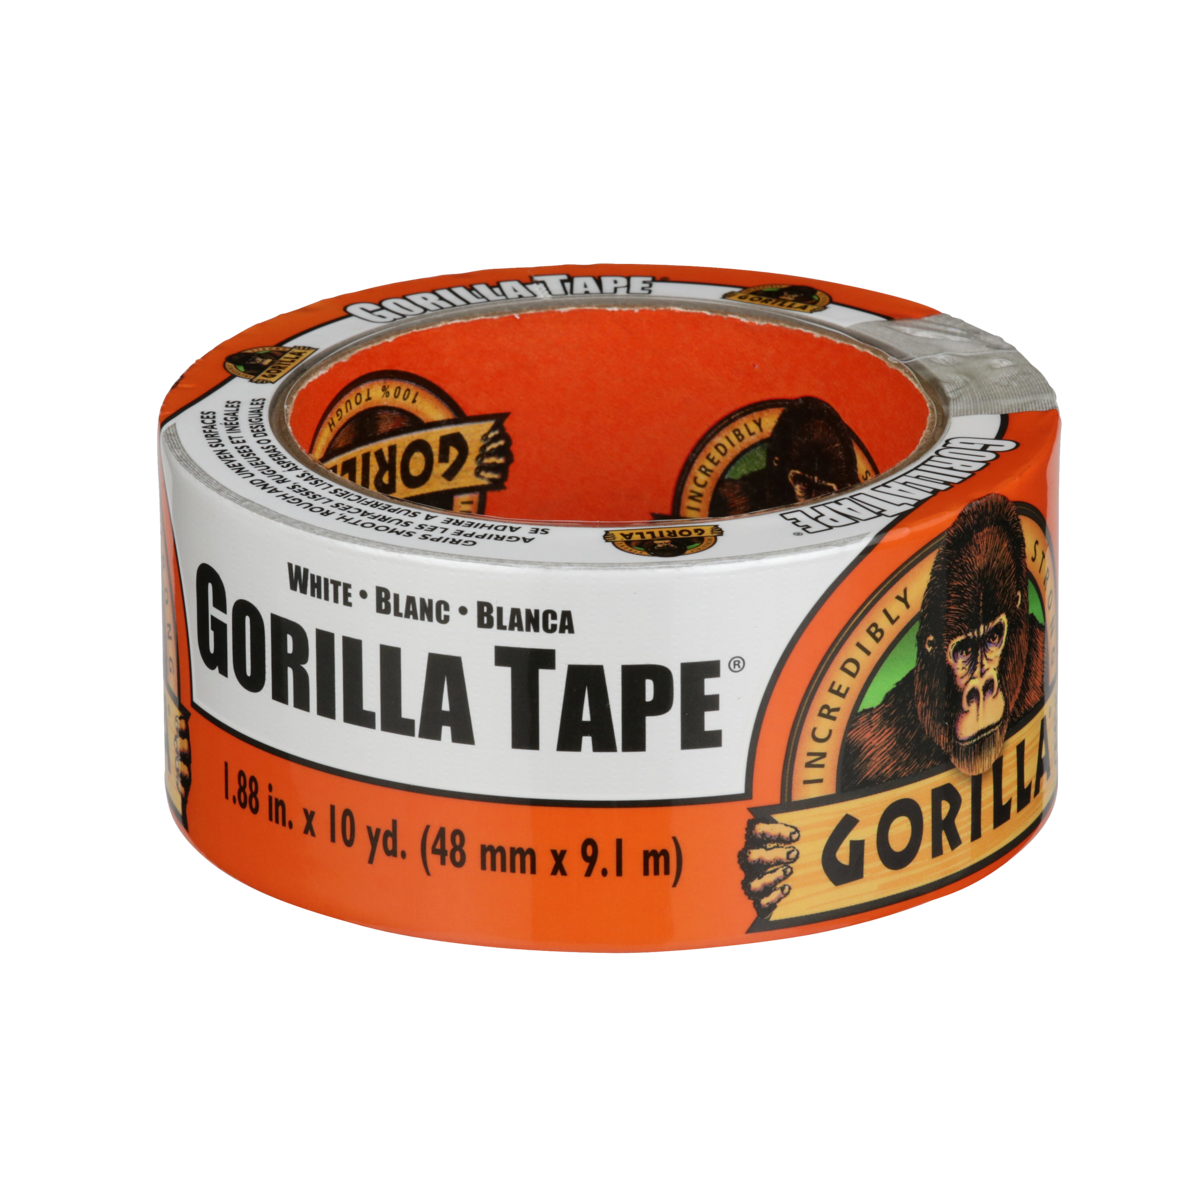 Gorilla White Duct Tape, 1.88 x 10 yd, White, (Pack of 3)